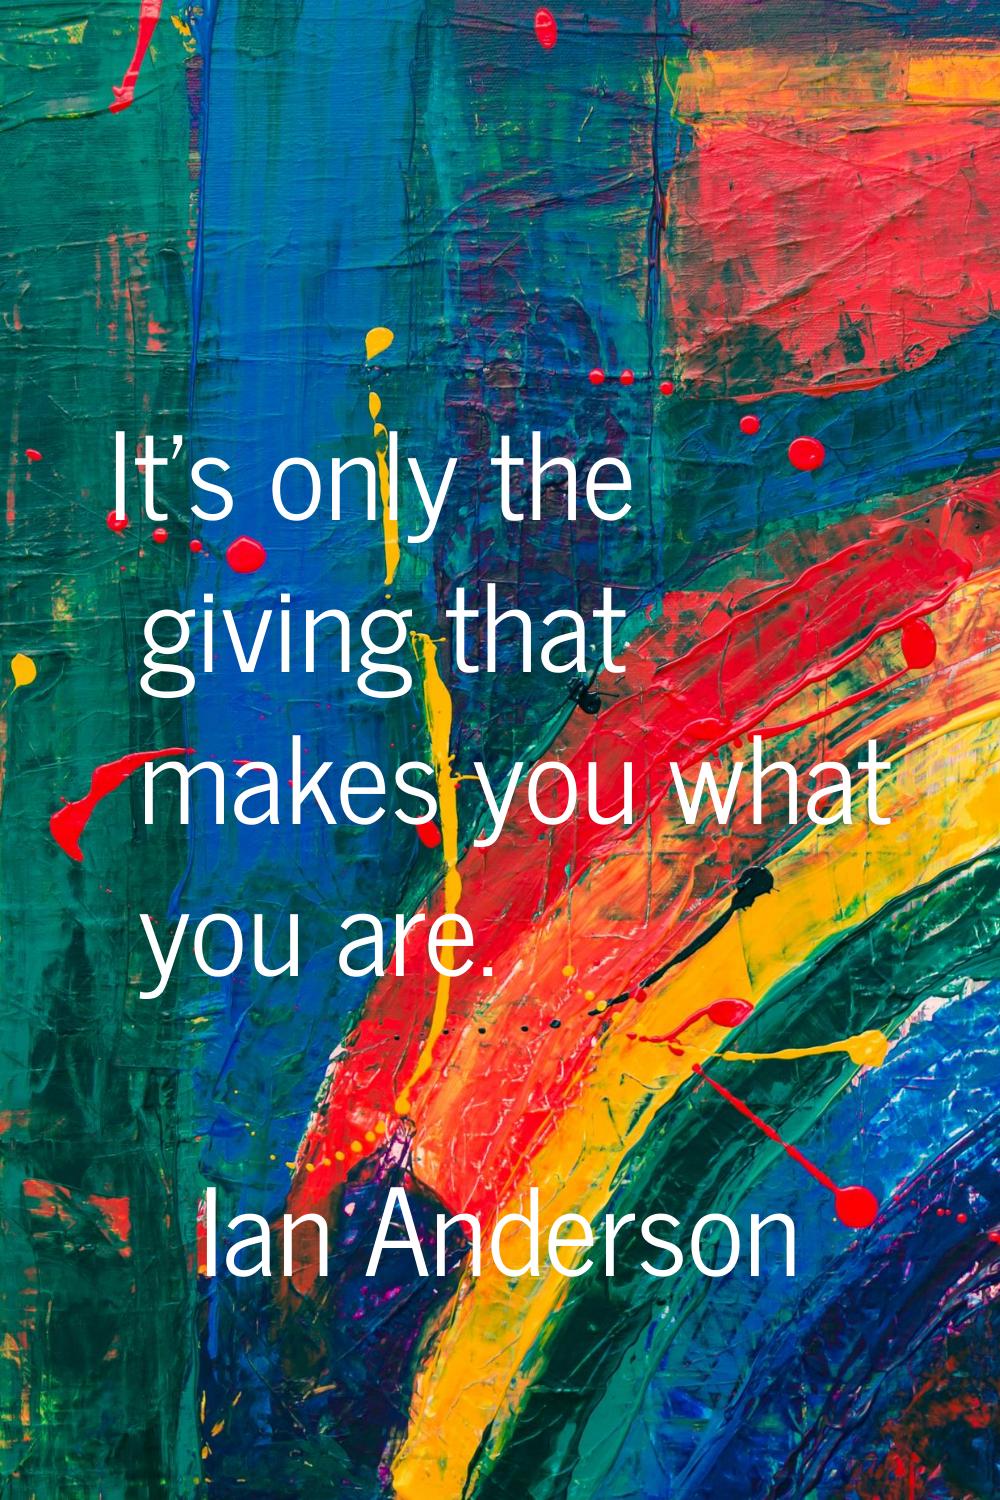 It's only the giving that makes you what you are.